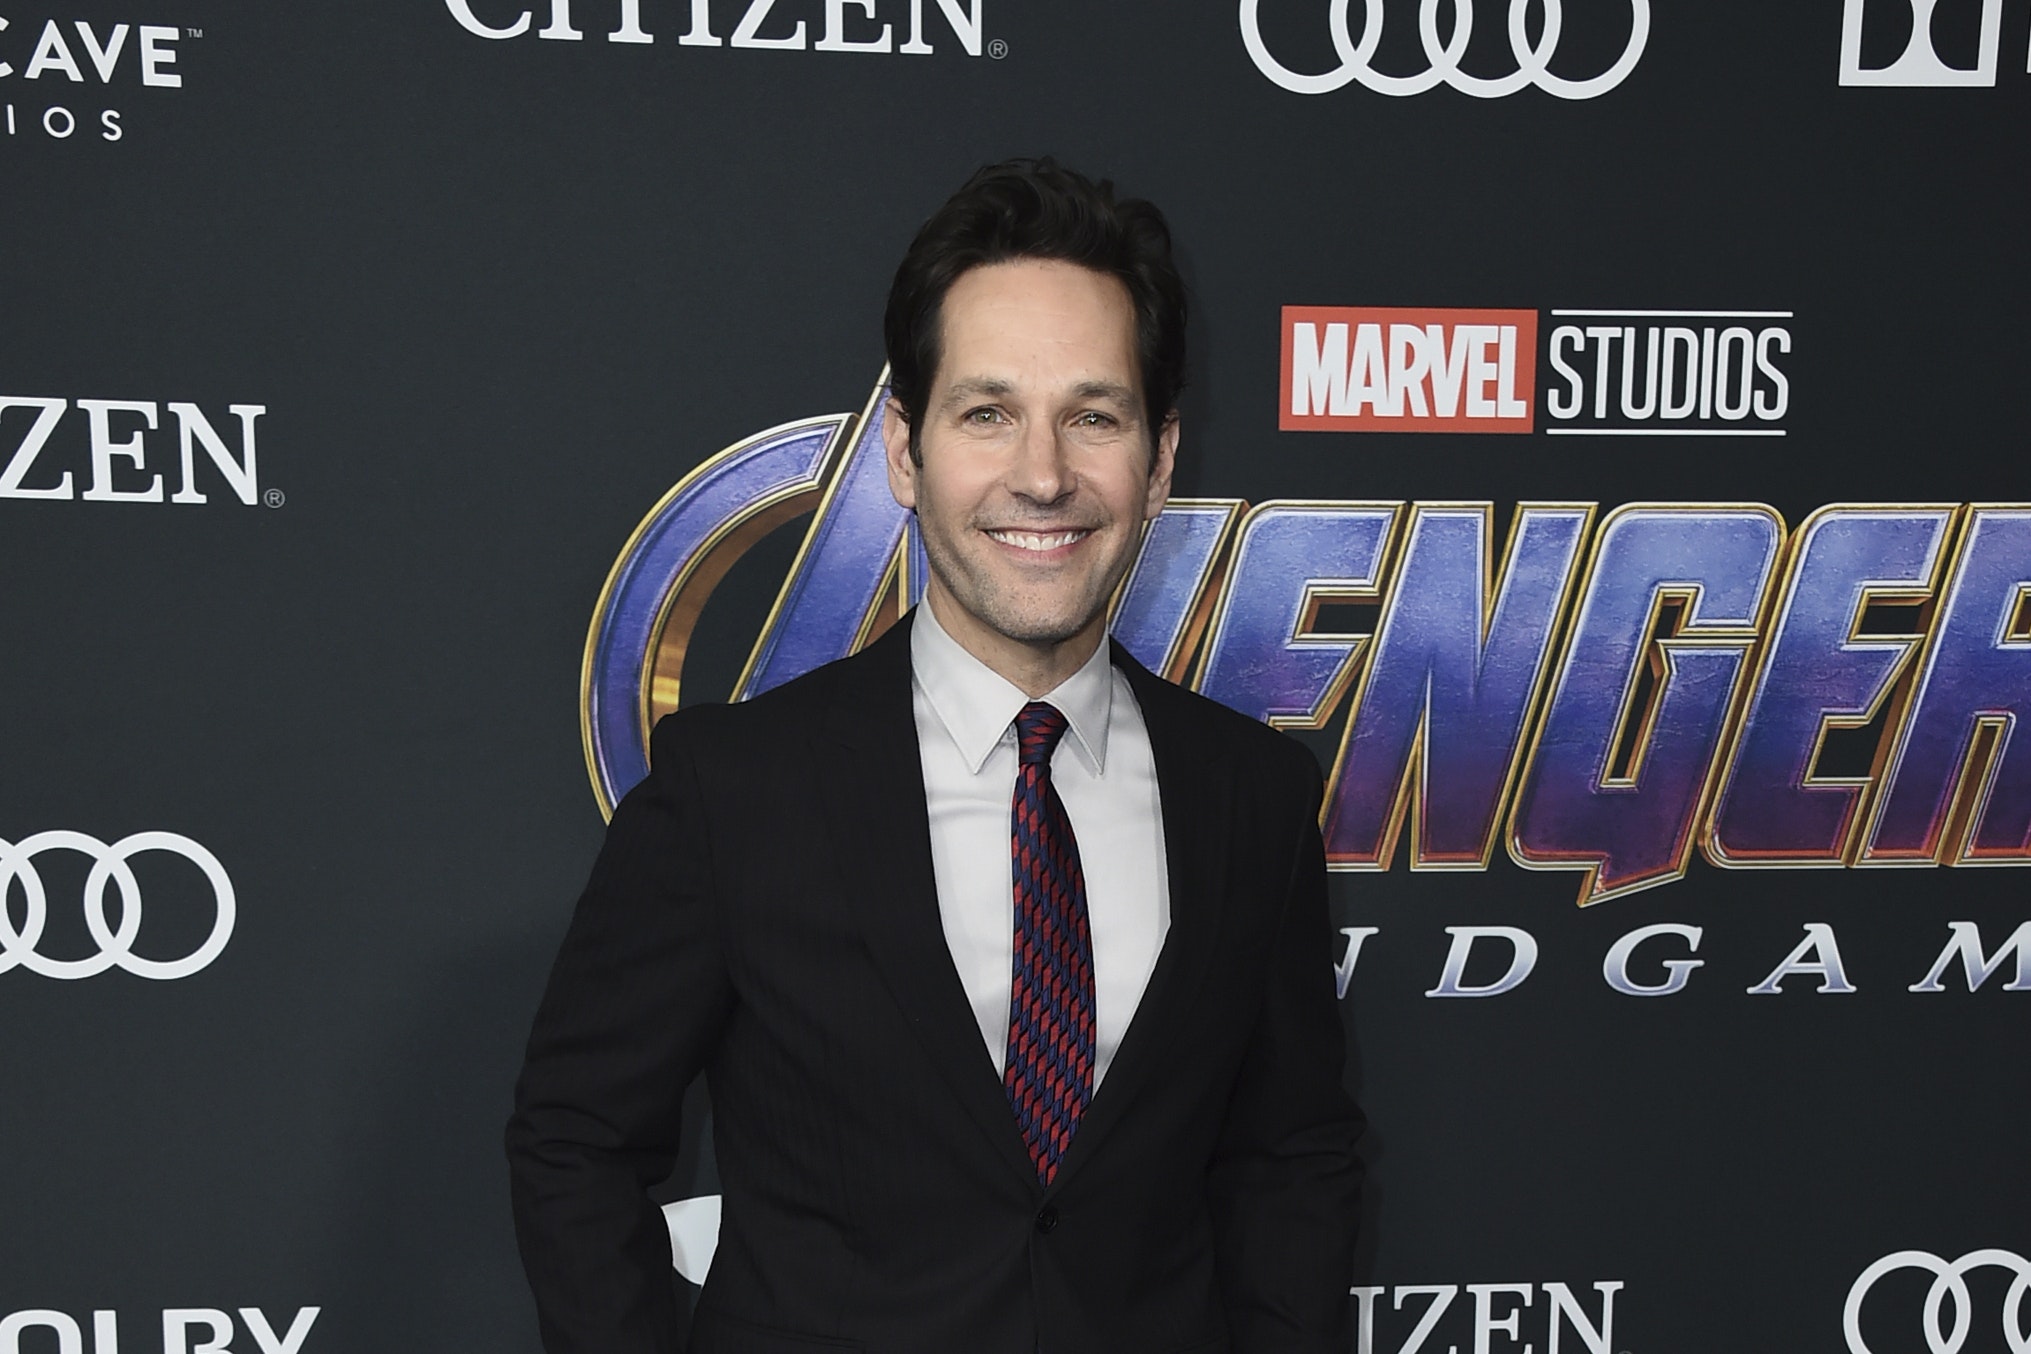 Paul Rudd looking forward to no more Ant-Man and Thanos fan theories